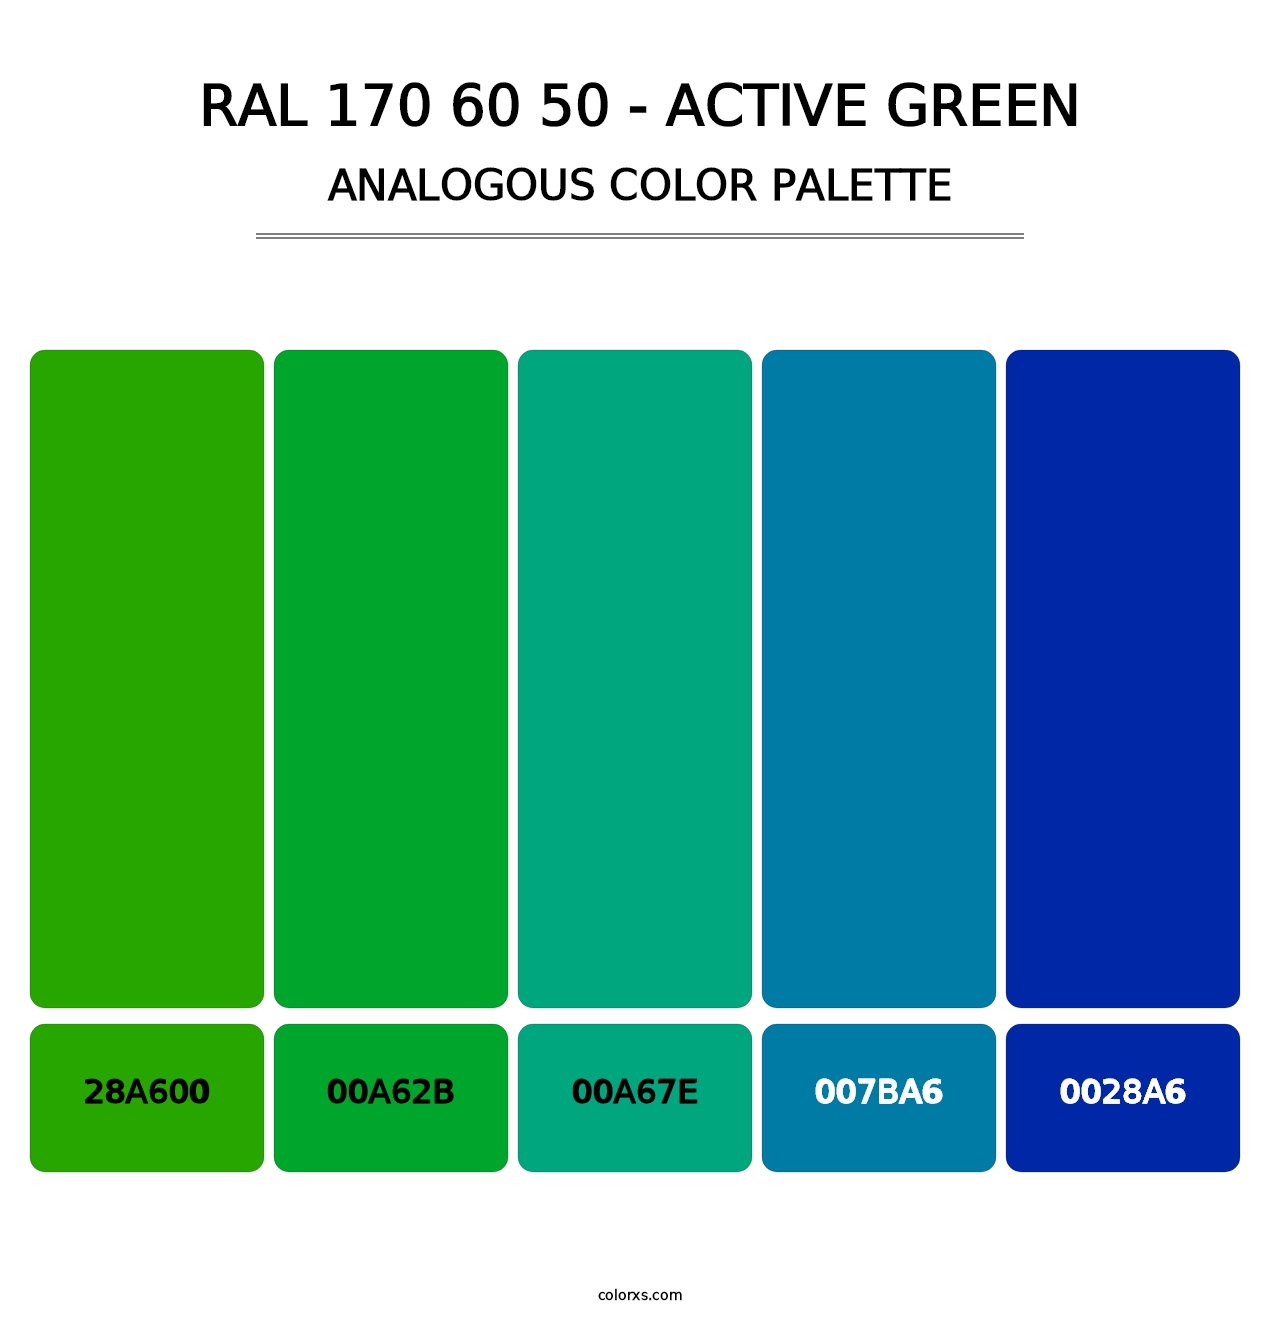 RAL 170 60 50 - Active Green - Analogous Color Palette